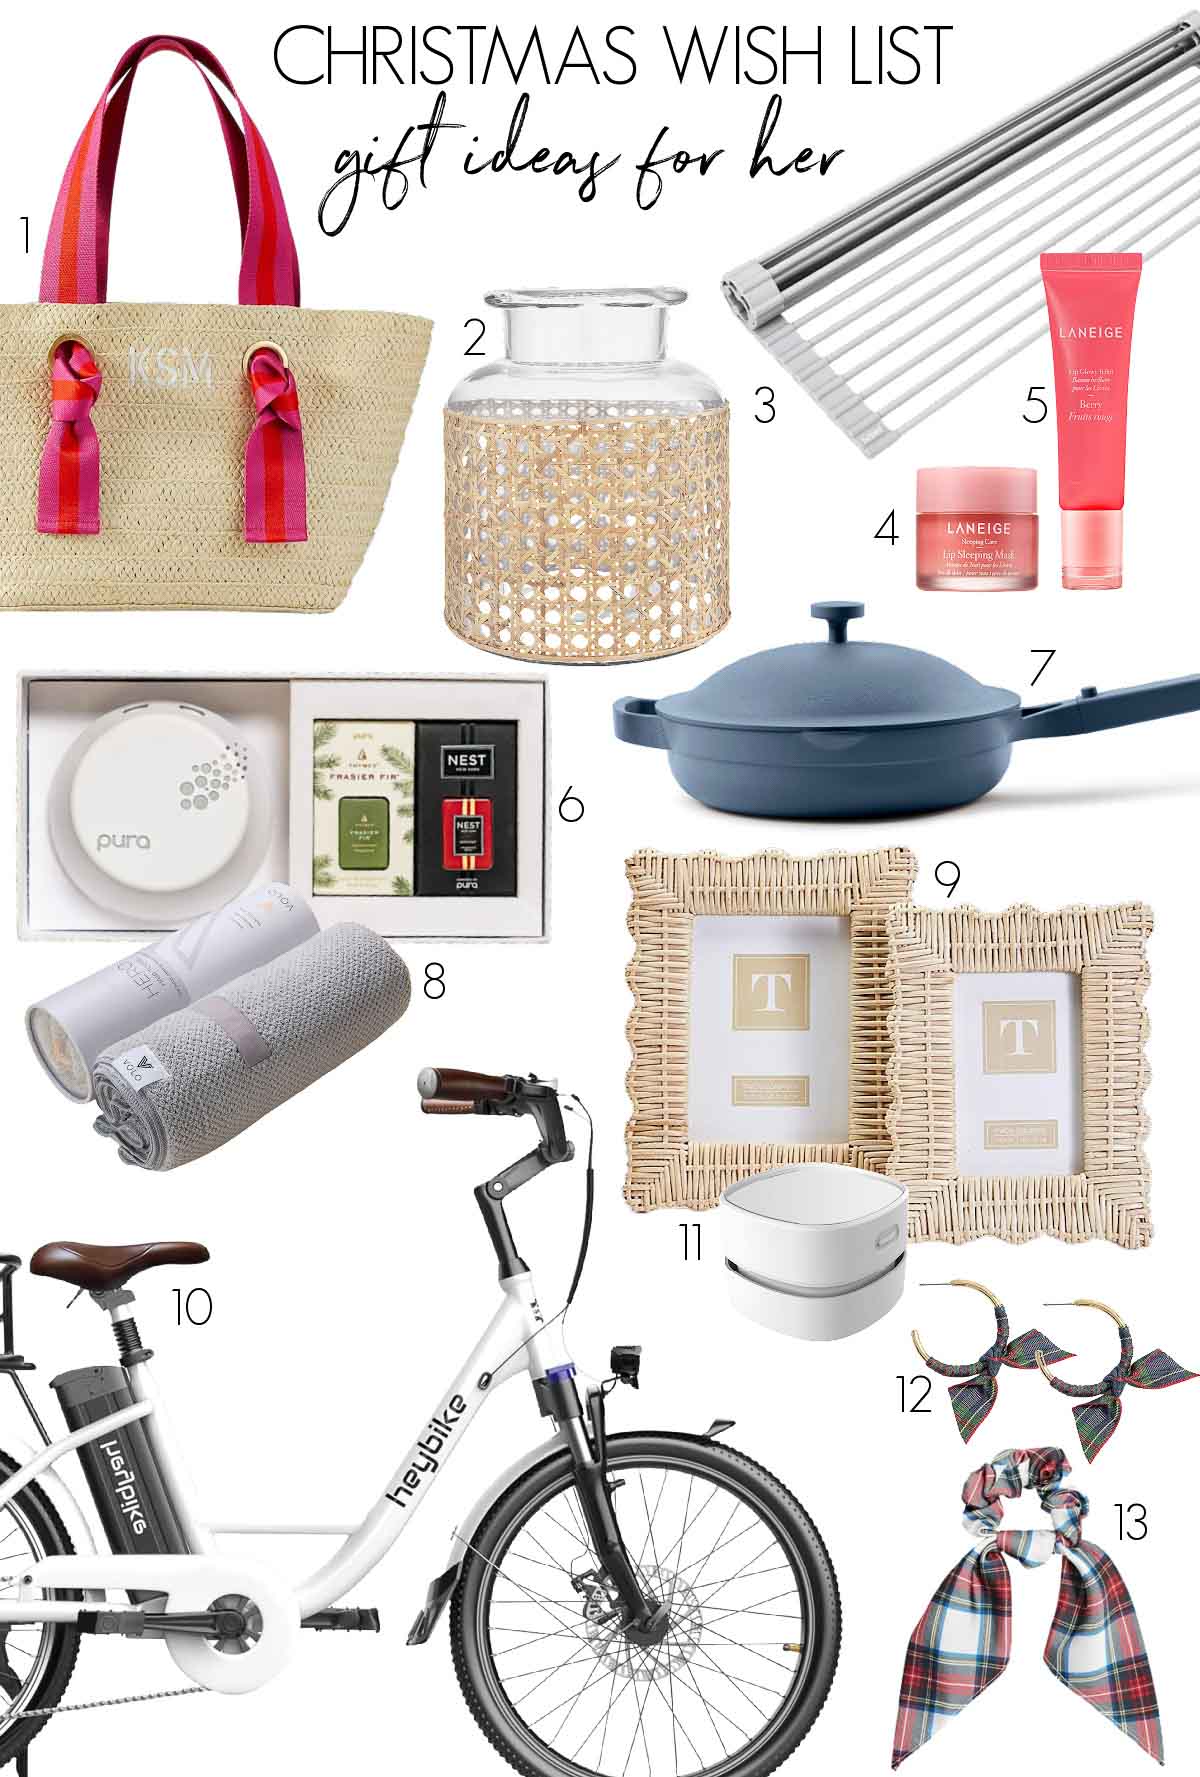 Christmas wish list gift ideas for her